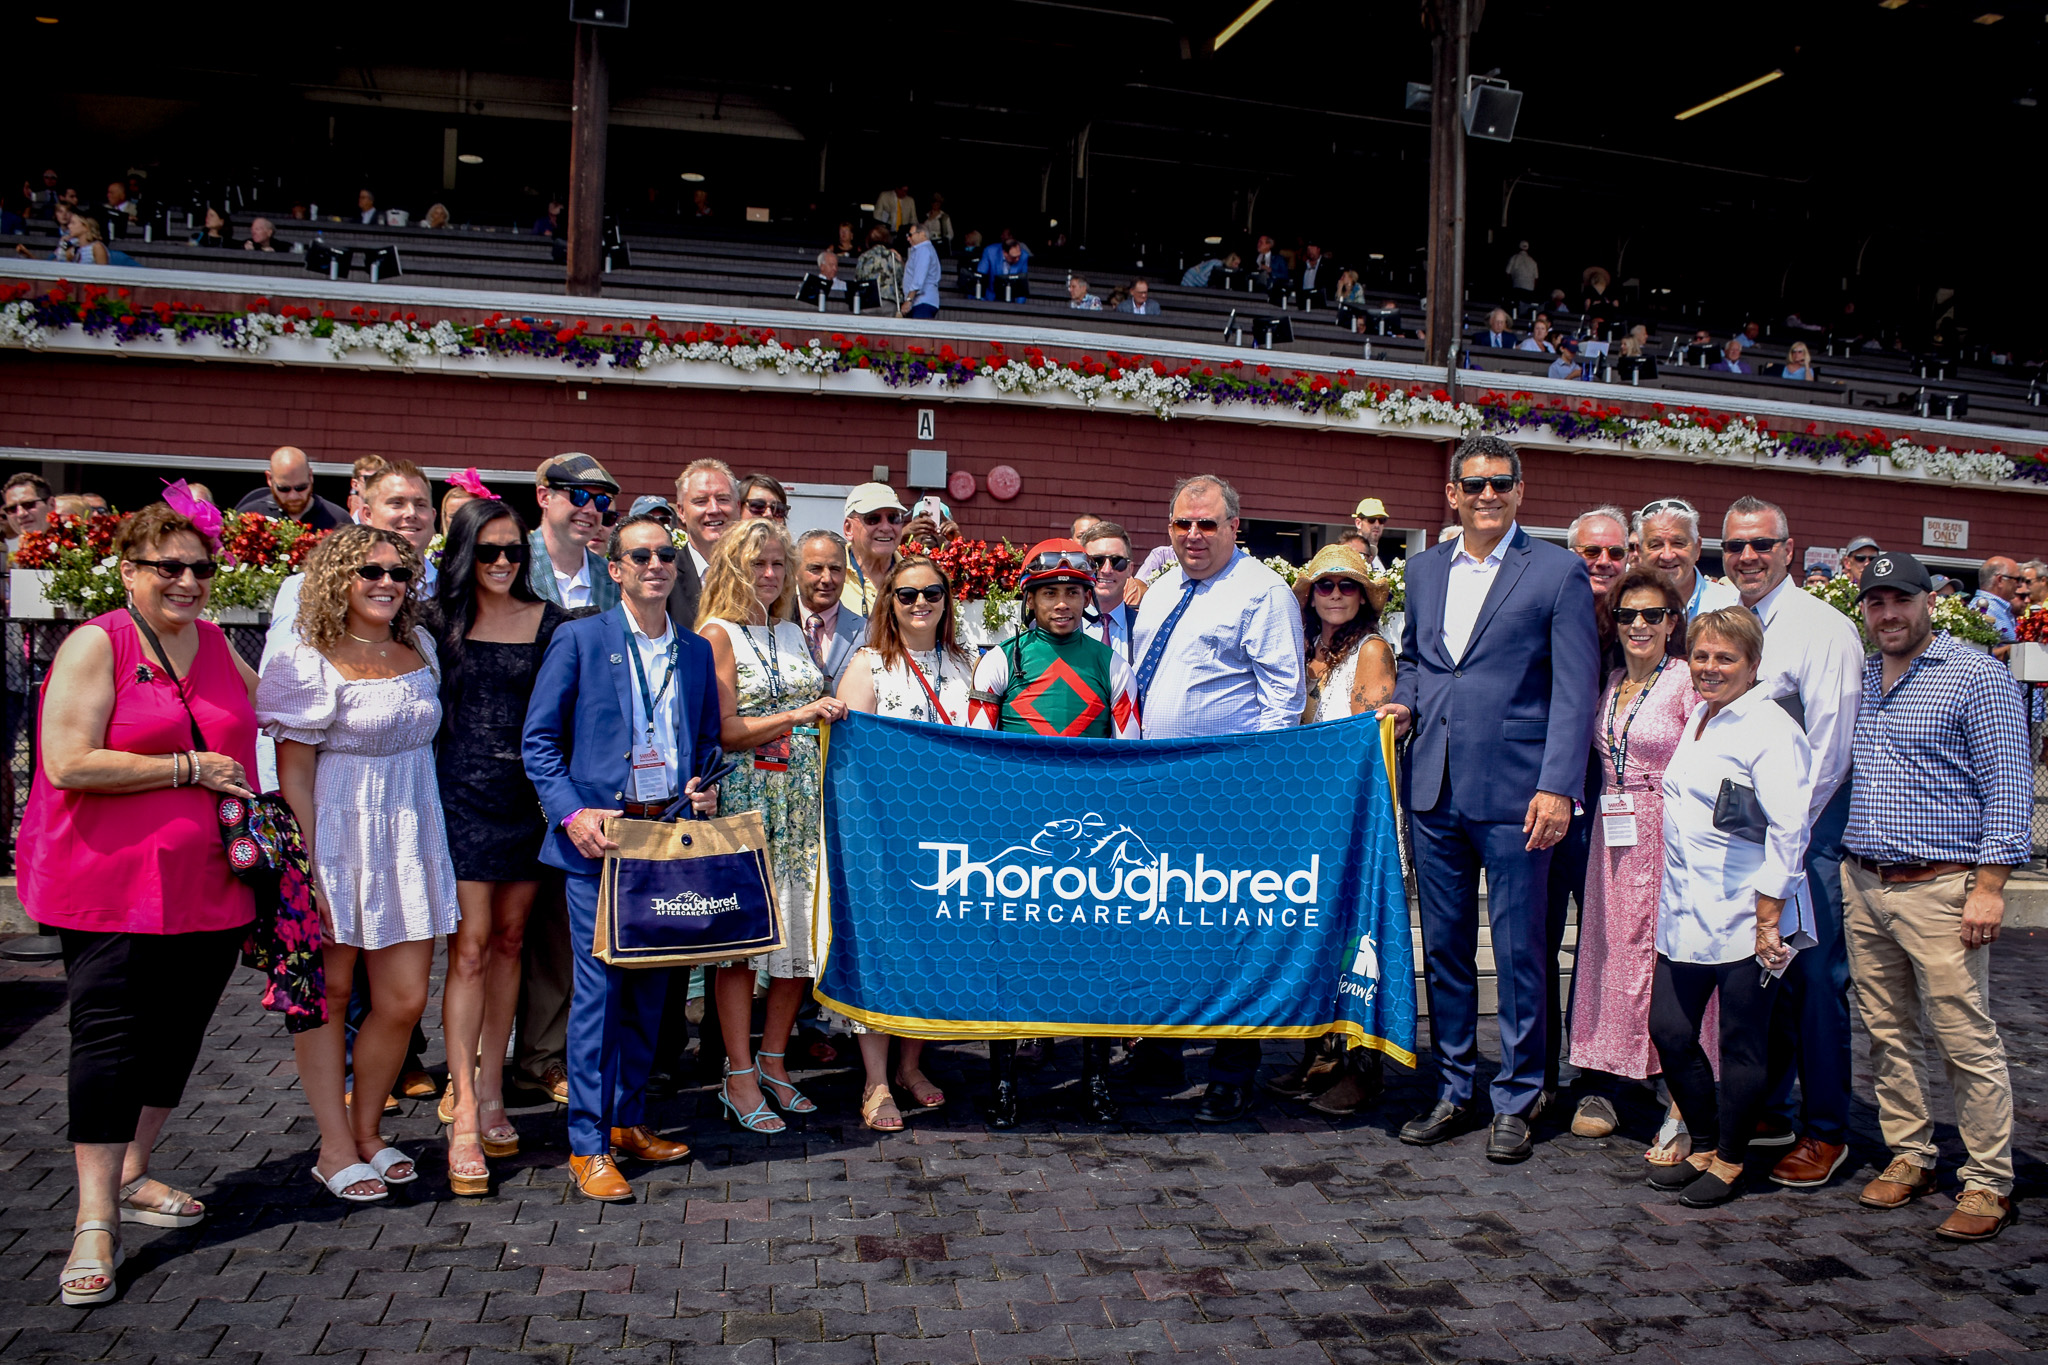 Thoroughbred Aftercare Alliance to be Present at Saratoga Race Course for Belmont Stakes